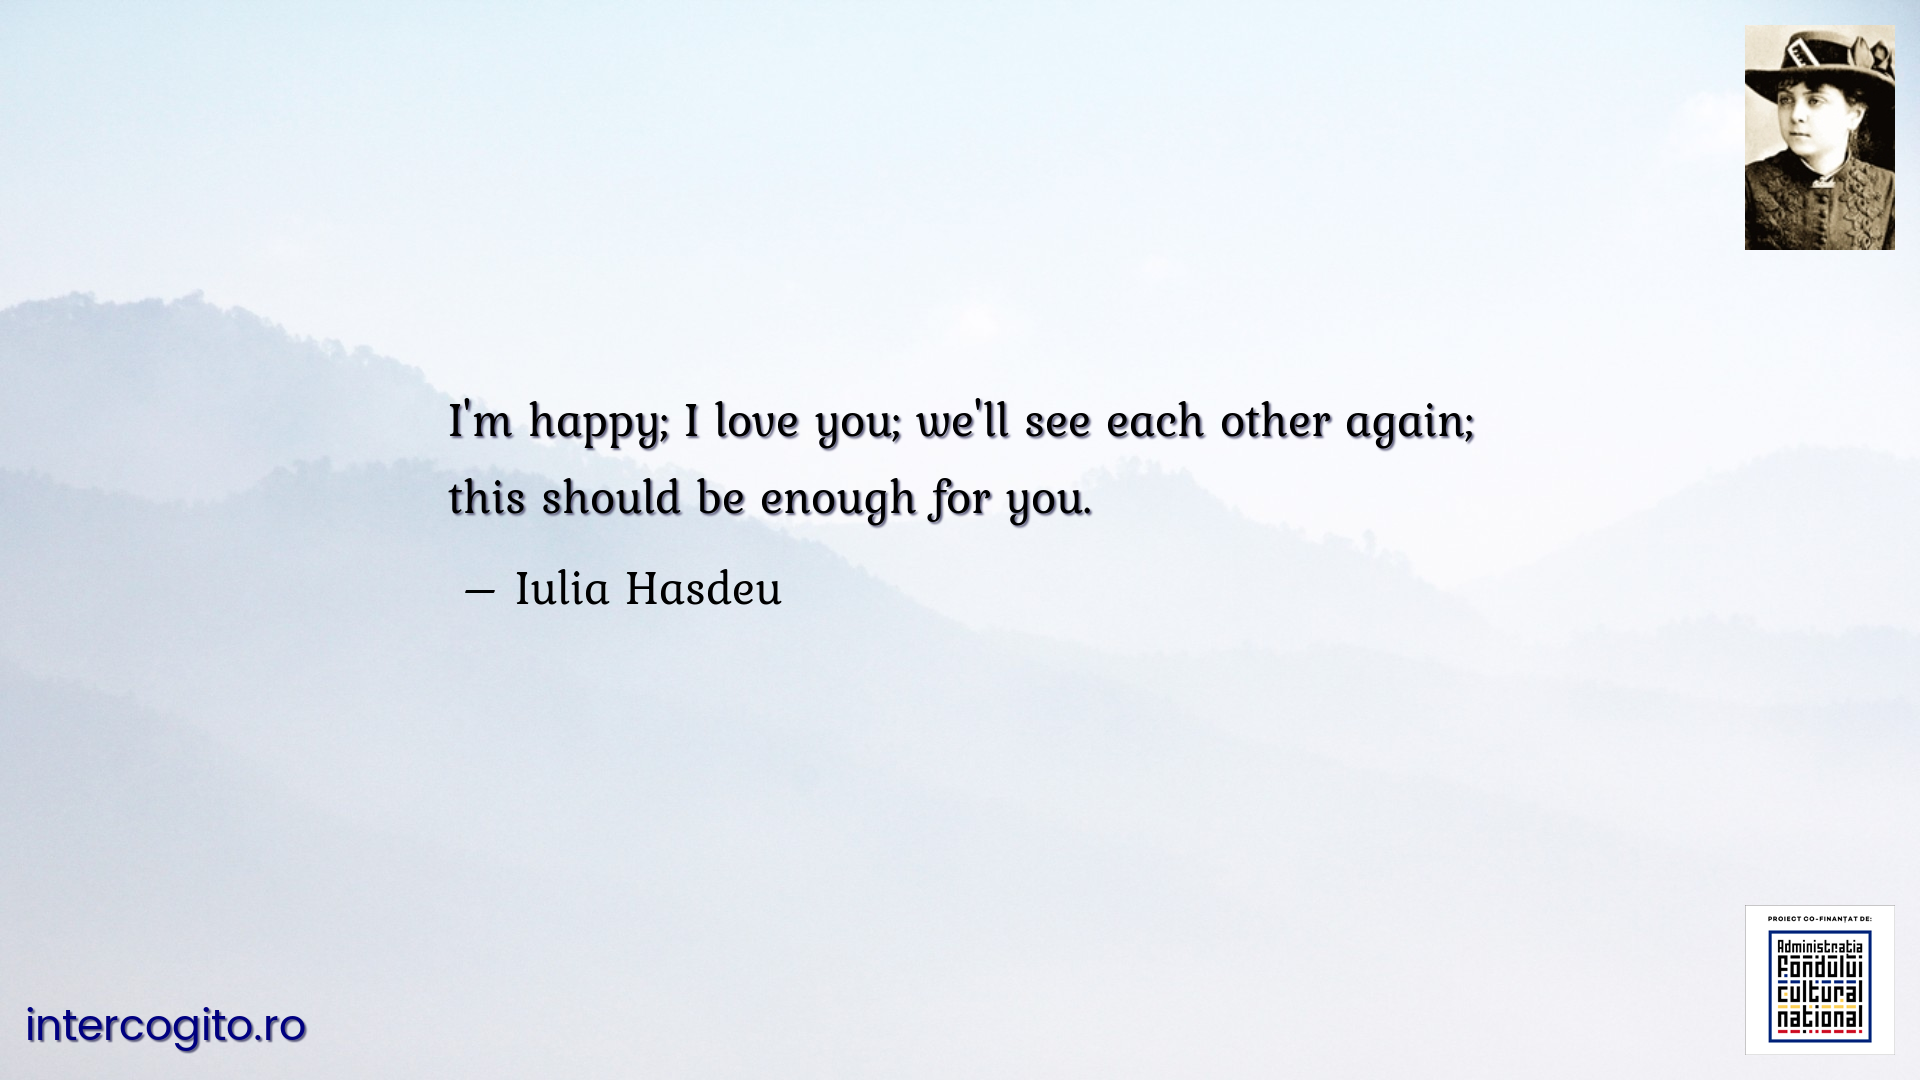 I'm happy; I love you; we'll see each other again; this should be enough for you.